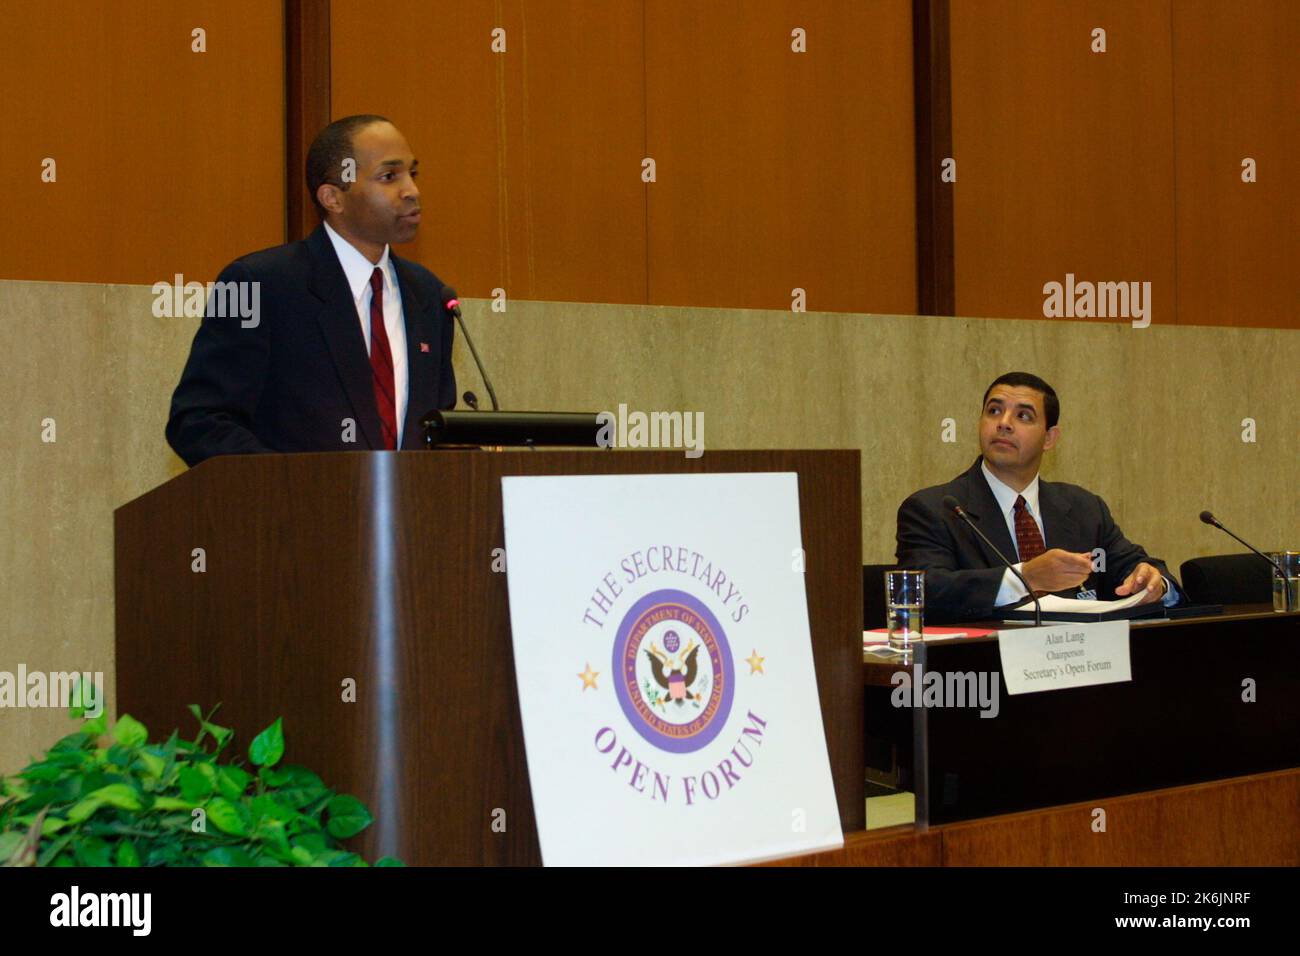 Secretary's Open Forum session in Loy Henderson Auditorium, featuring Henry Cuellar, Secretary of State for Texas, with introduction and award presentation by Alan Lang of Open Forum staff Stock Photo